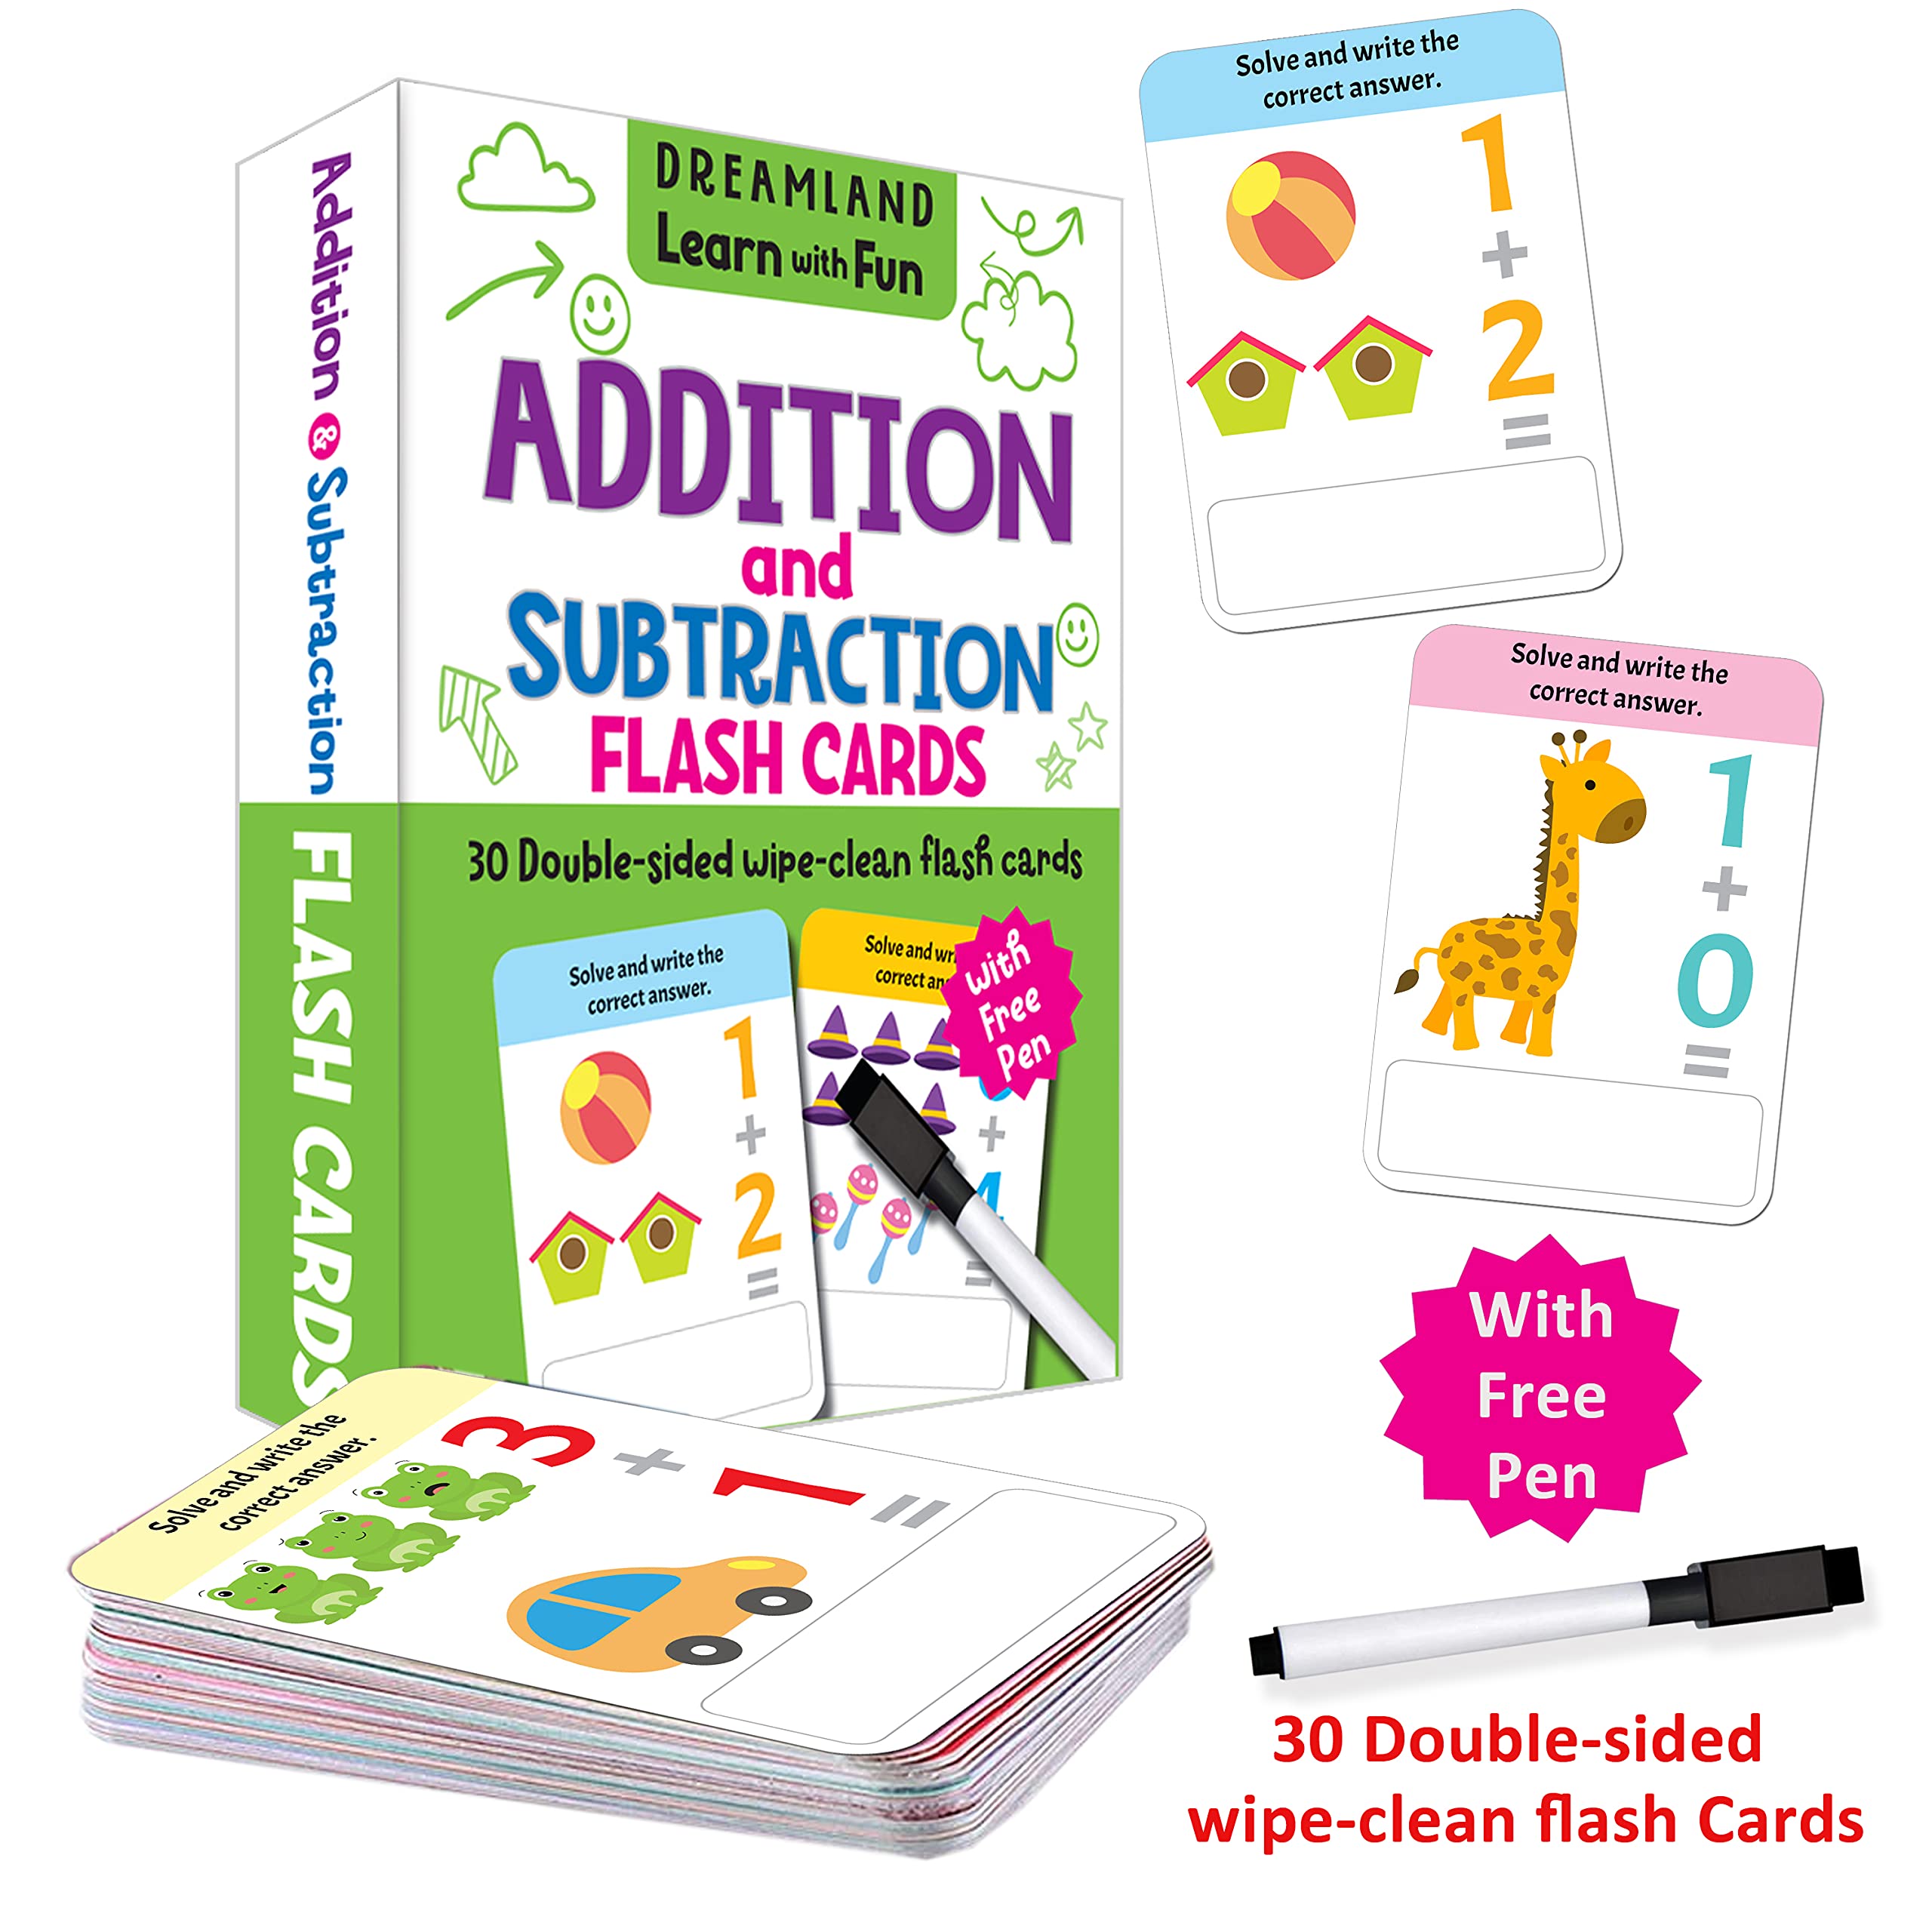 Flash Cards Addition and Subtraction- 30 Double Sided Wipe Clean Flash Cards for Kids (With Free Pen)